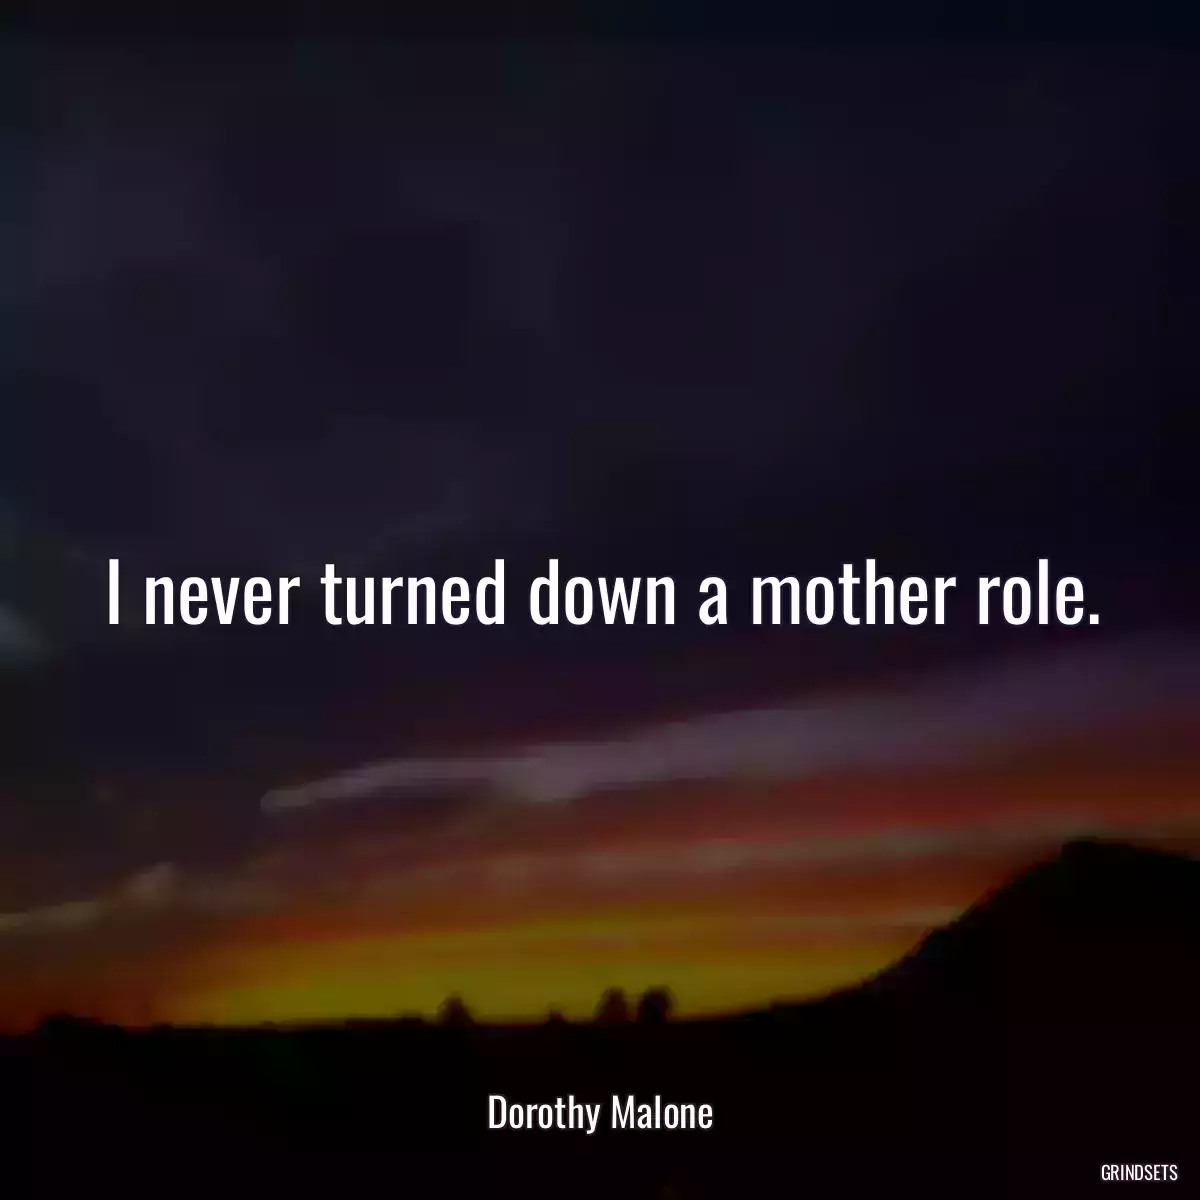 I never turned down a mother role.